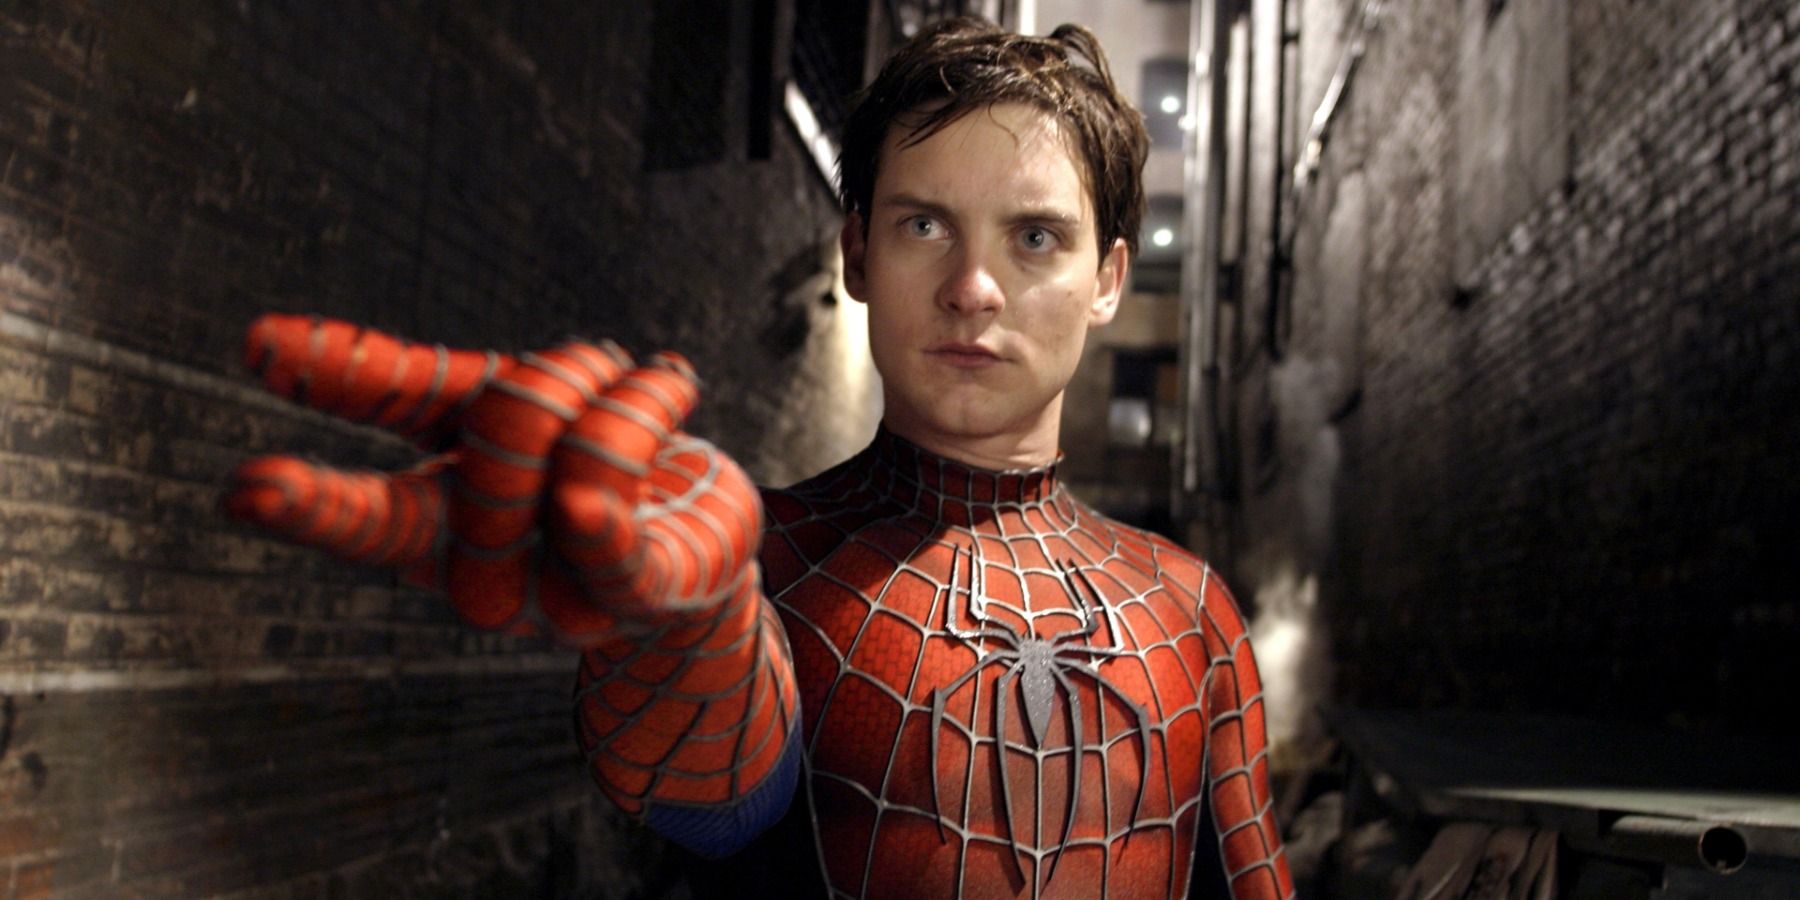 Tobey maguire as spider-man